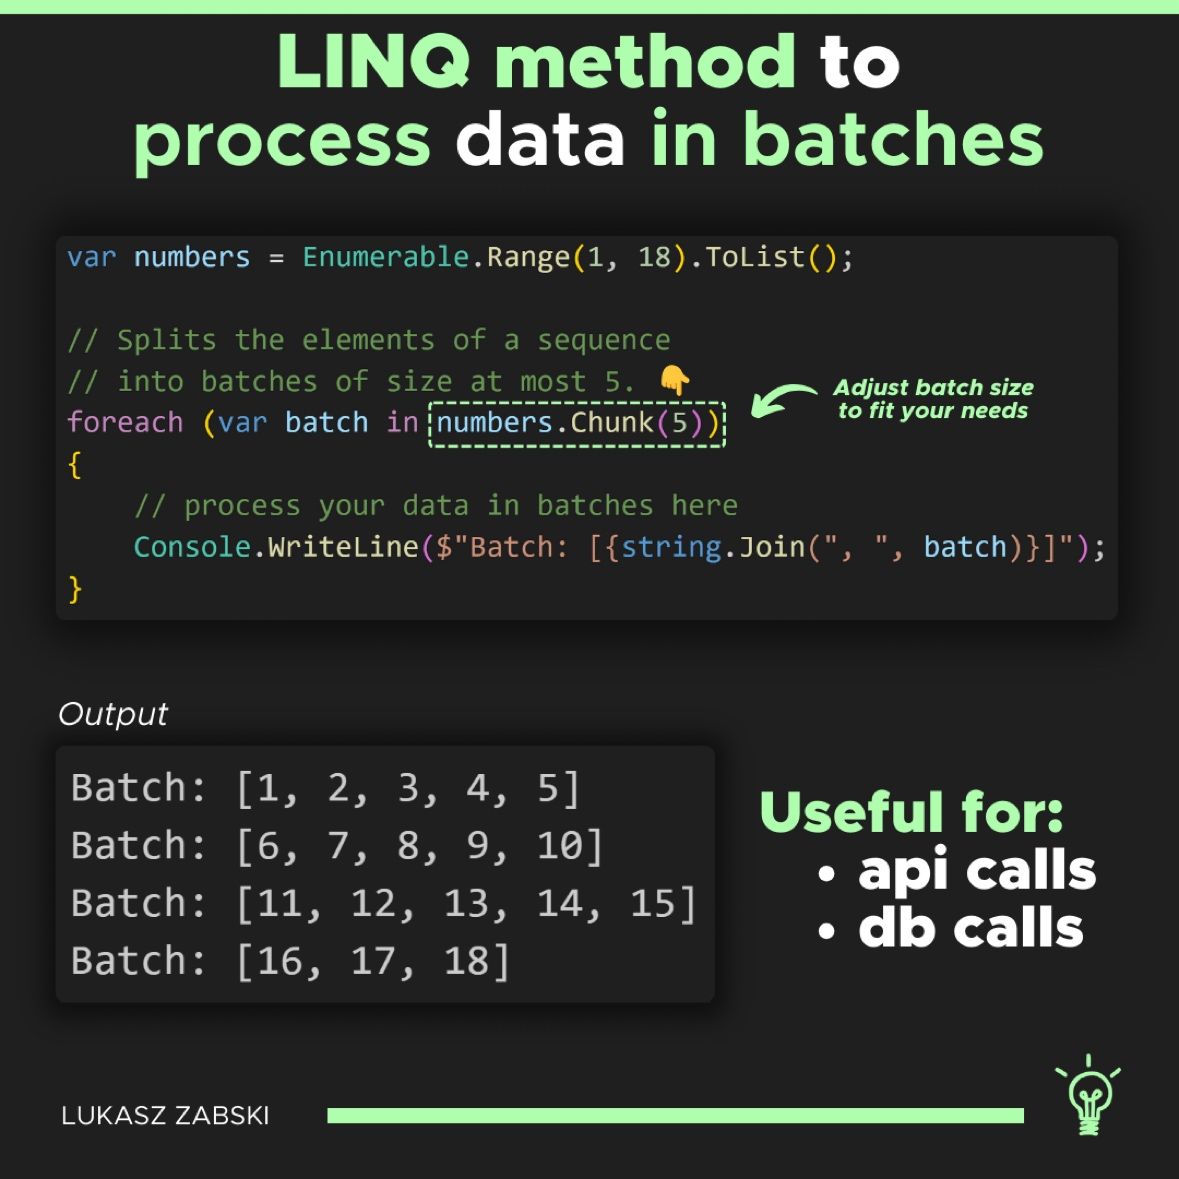 LINQ Chunk example  ⬇️

This was new in .NET 6 and is great for splitting up collections into smaller batches. 

Have you used it much?

Thanks to Łukasz Żabski on LinkedIn for the image ->
linkedin.com/in/zabski/

#dotnet